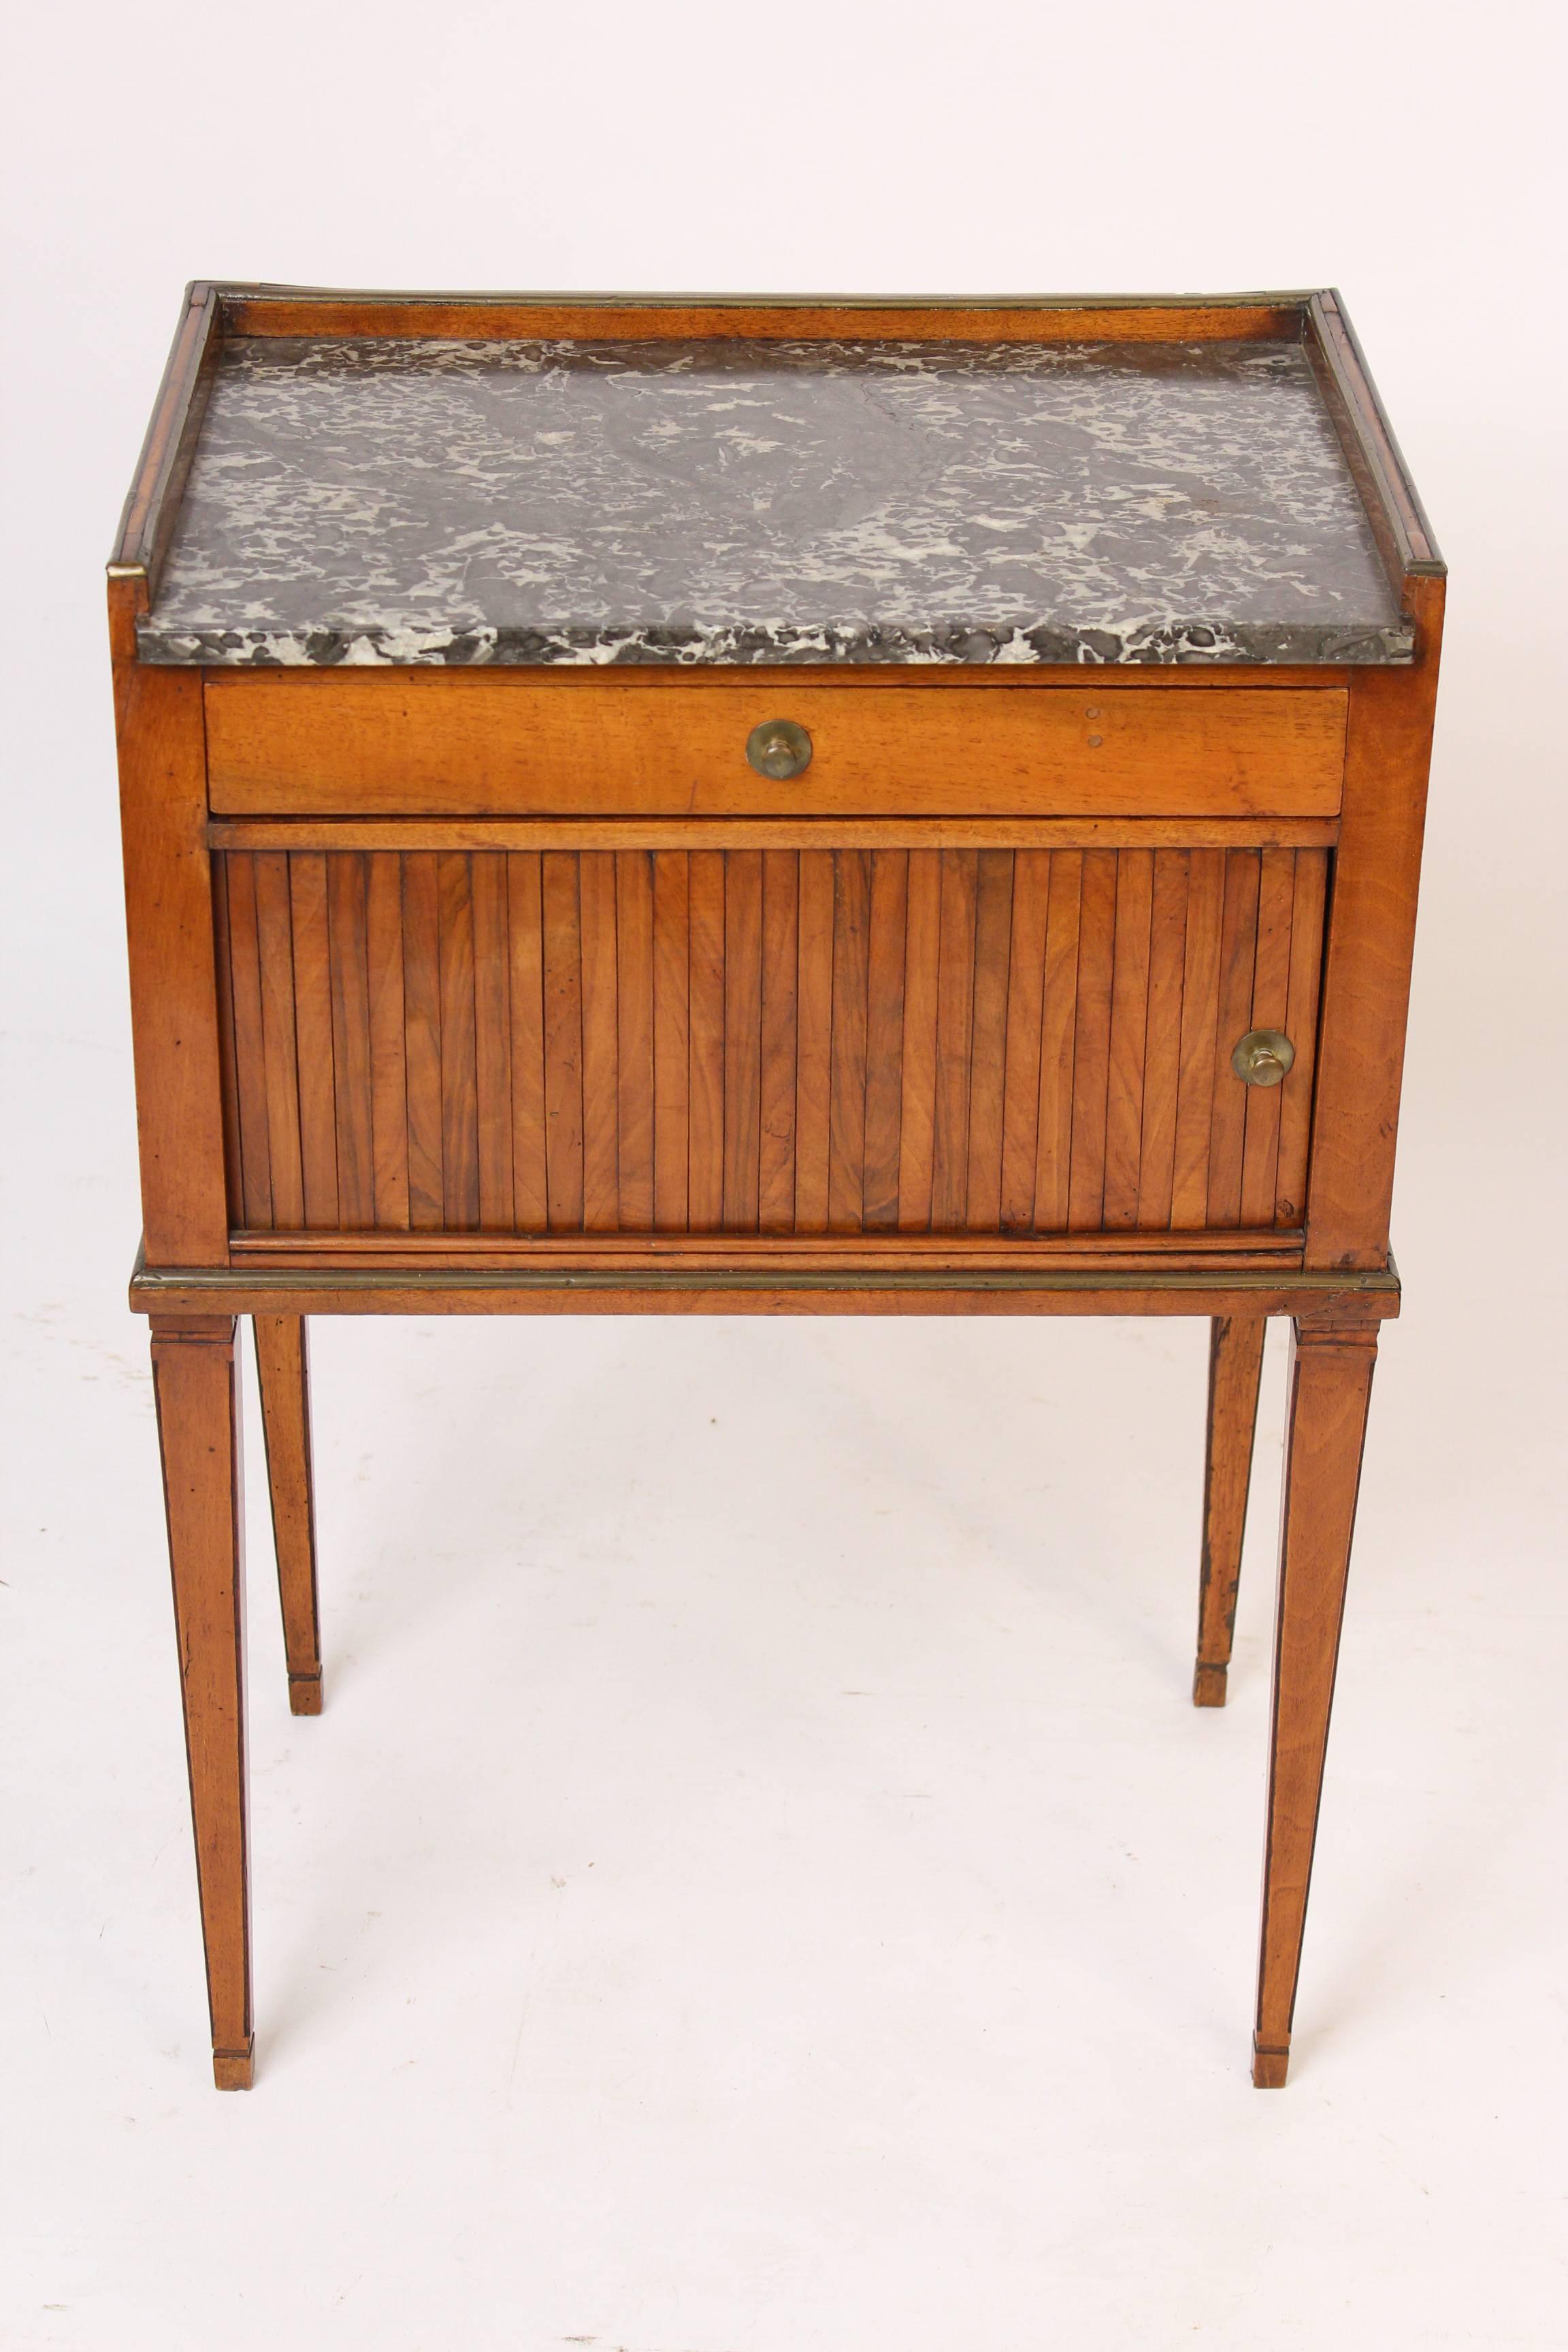 Directoire walnut and mahogany occasional table with a sliding tambour door, brass moldings and a marble top, early 19th century. Nice old patina.